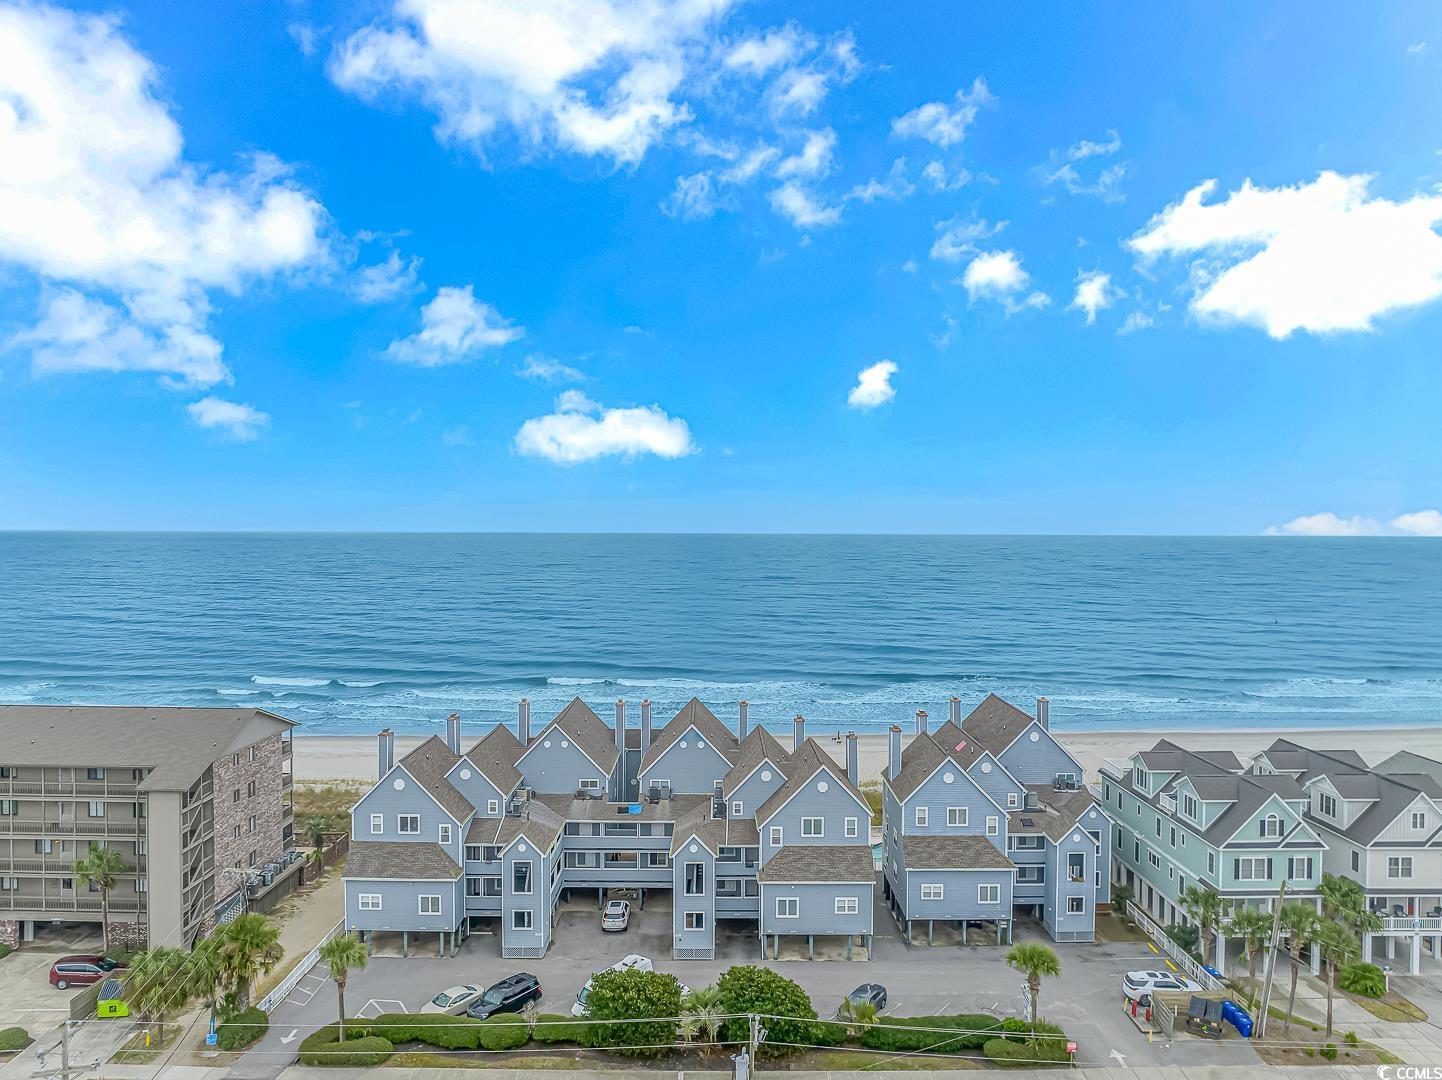 open house sunday, january 14th from 12:30-2:30! beautiful remodeled oceanfront condo located in cape coddages i in the town of surfside beach! this unit boasts many new upgrades and only has been used as a second home. on the first floor level you have an open concept layout with the kitchen and living room. the kitchen has been updated with quartz countertops, subway tile backsplash and stainless steel appliances. cozy up to the wood burning fireplace in the living room, while taking in the beautiful views of the ocean. there is also a half bath located on the first floor. the spacious master suite is located on the second floor, giving you great views of the beach. the second bedroom is also located on the second floor, with its own private bath. this complex building has recently undergone several renovations, including new patios, gutters, outdoor hallway carpeting, hardie board sliding and refurbished pilings and pool. grab your flip flops and beach chair and enjoy what coastal life is all about! buyer is responsible for verification of square footage, hoa & zoning.